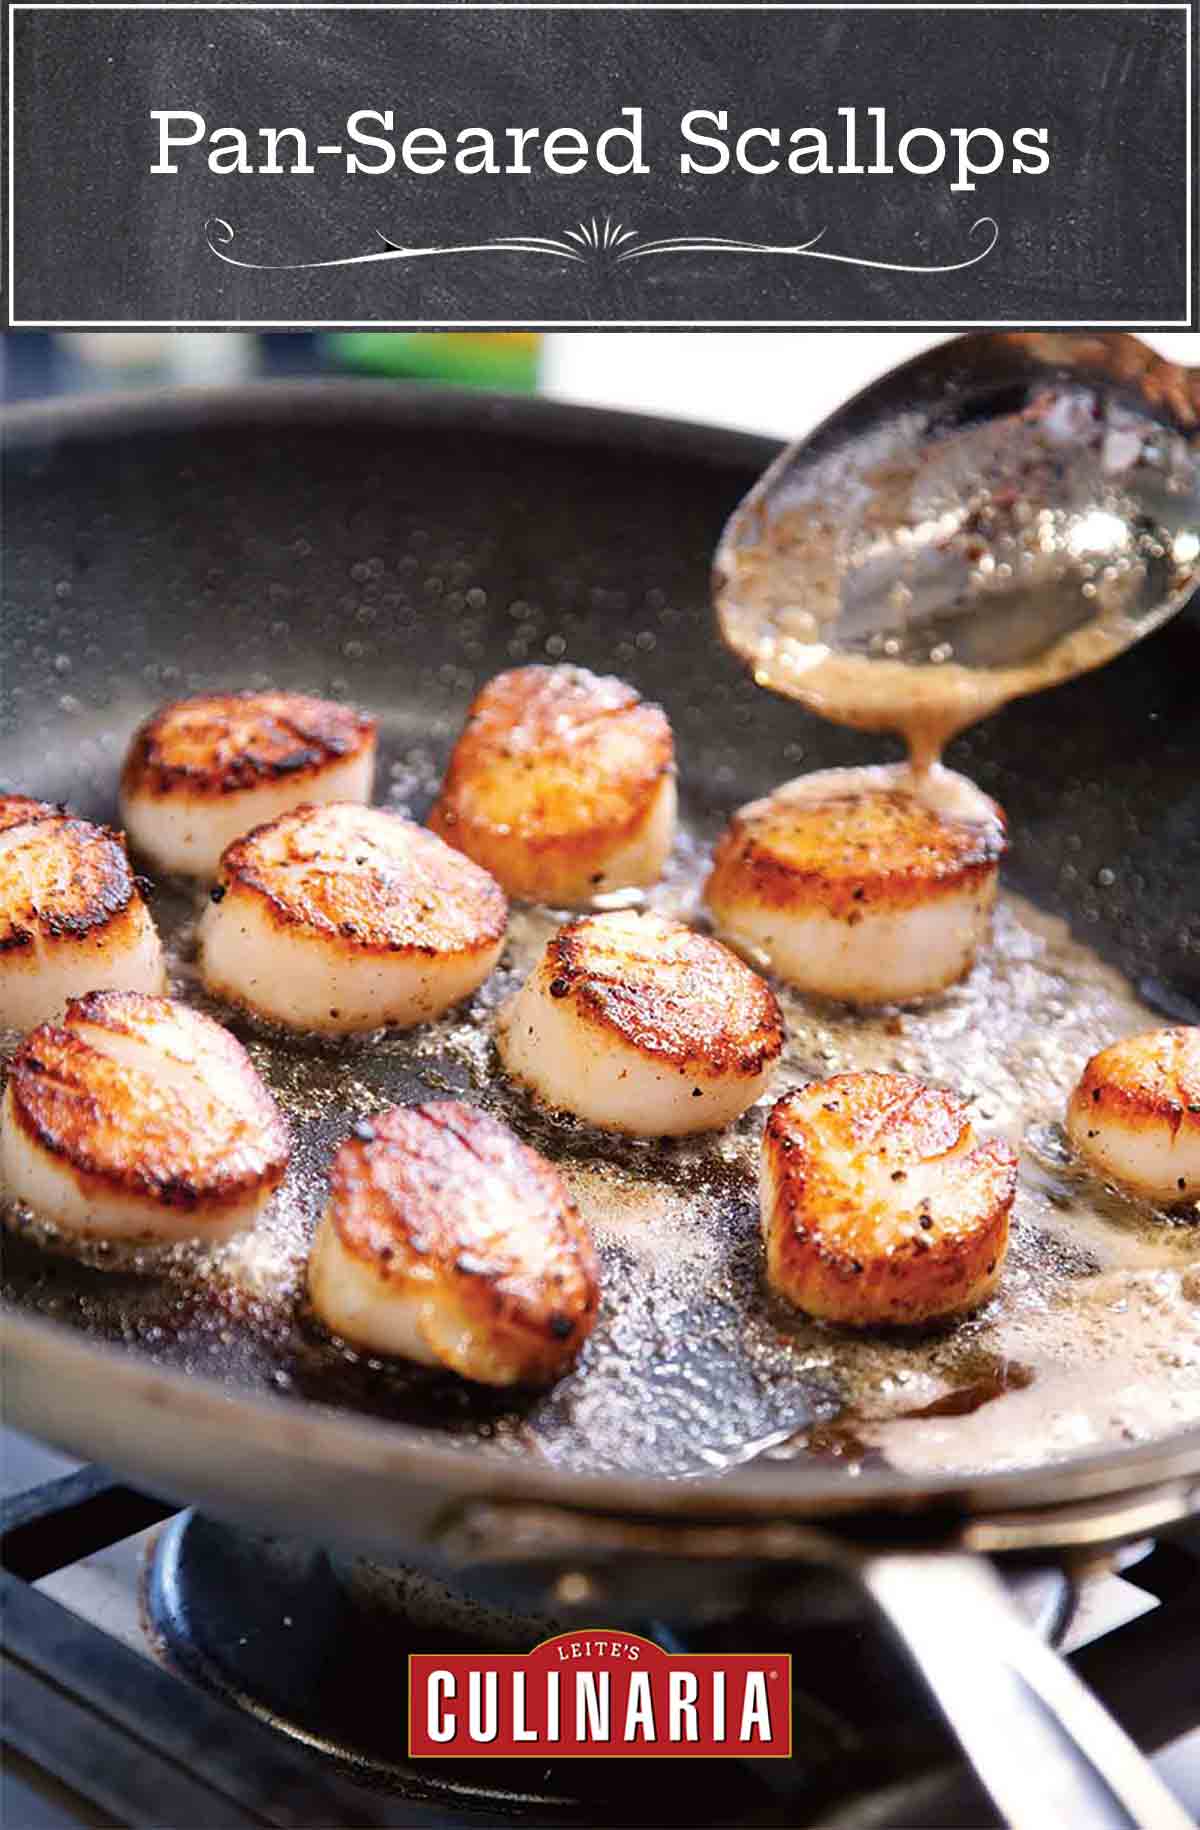 A skillet filled with pan seared scallops cooked in butter.